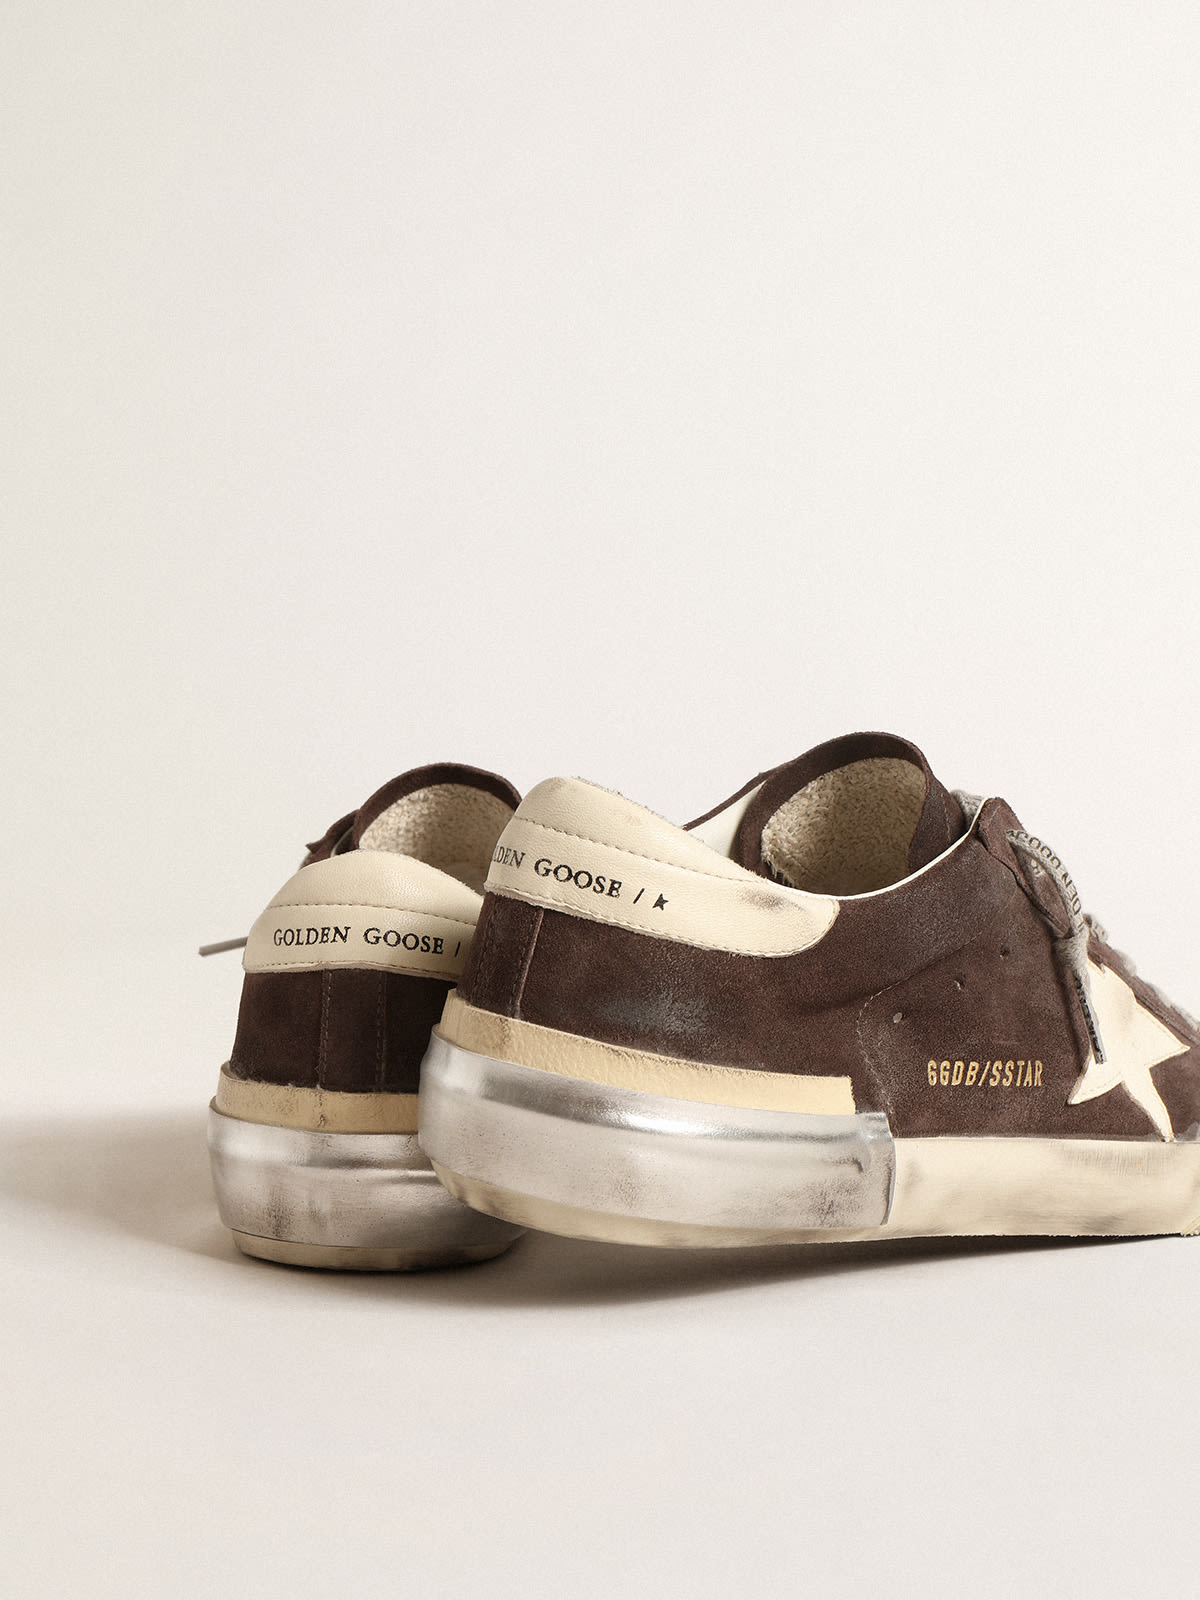 Golden Goose - Super-Star in gray suede with ecru nappa star and heel tab in 